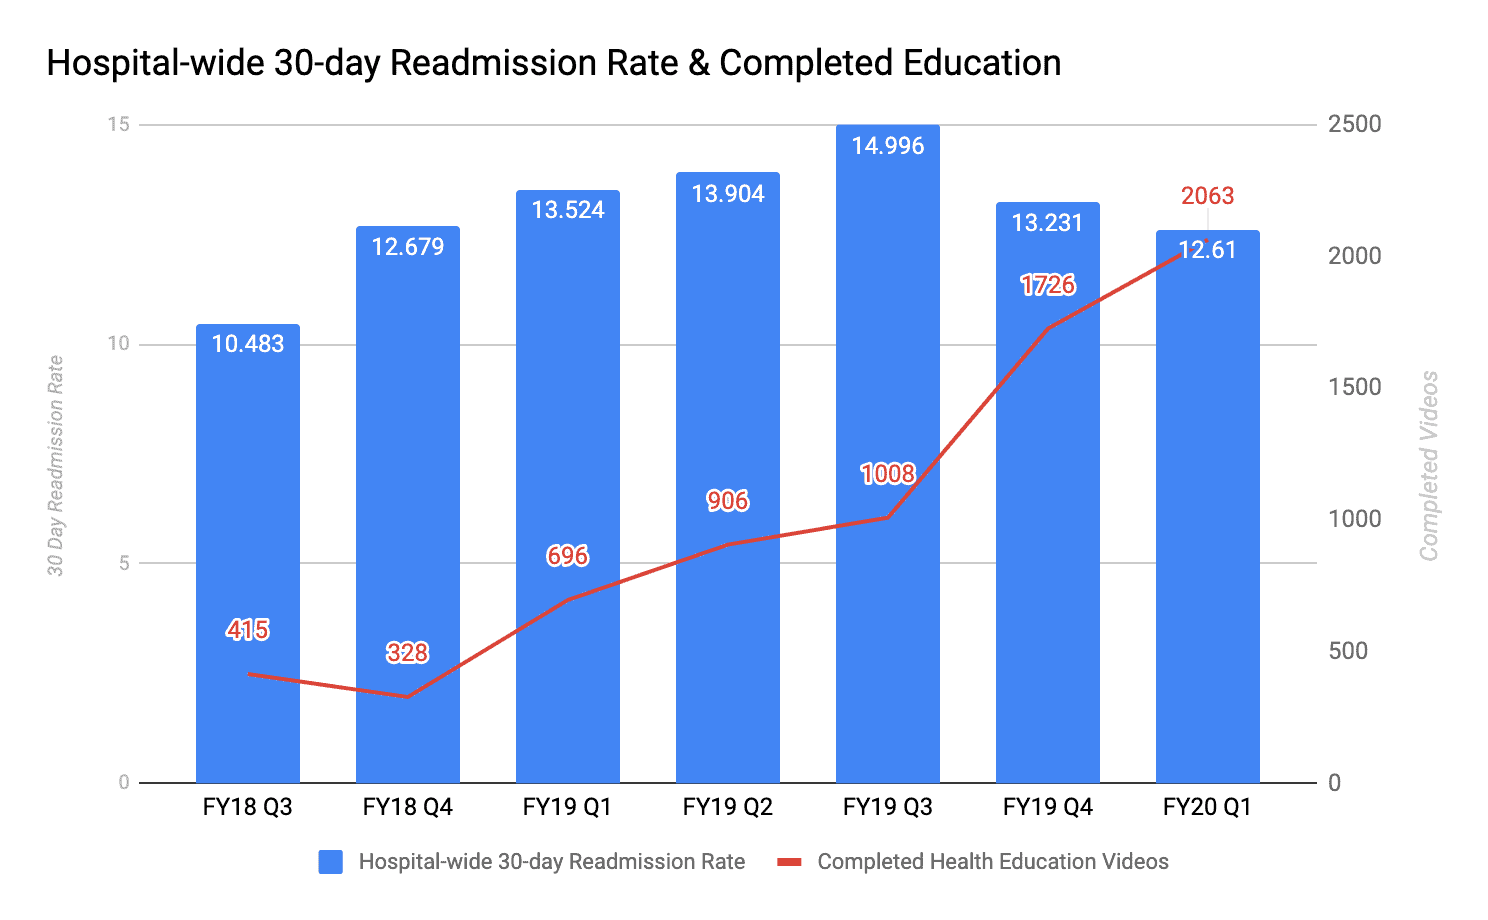 Hospital-wide 30-day Readmission Rate & Completed Education